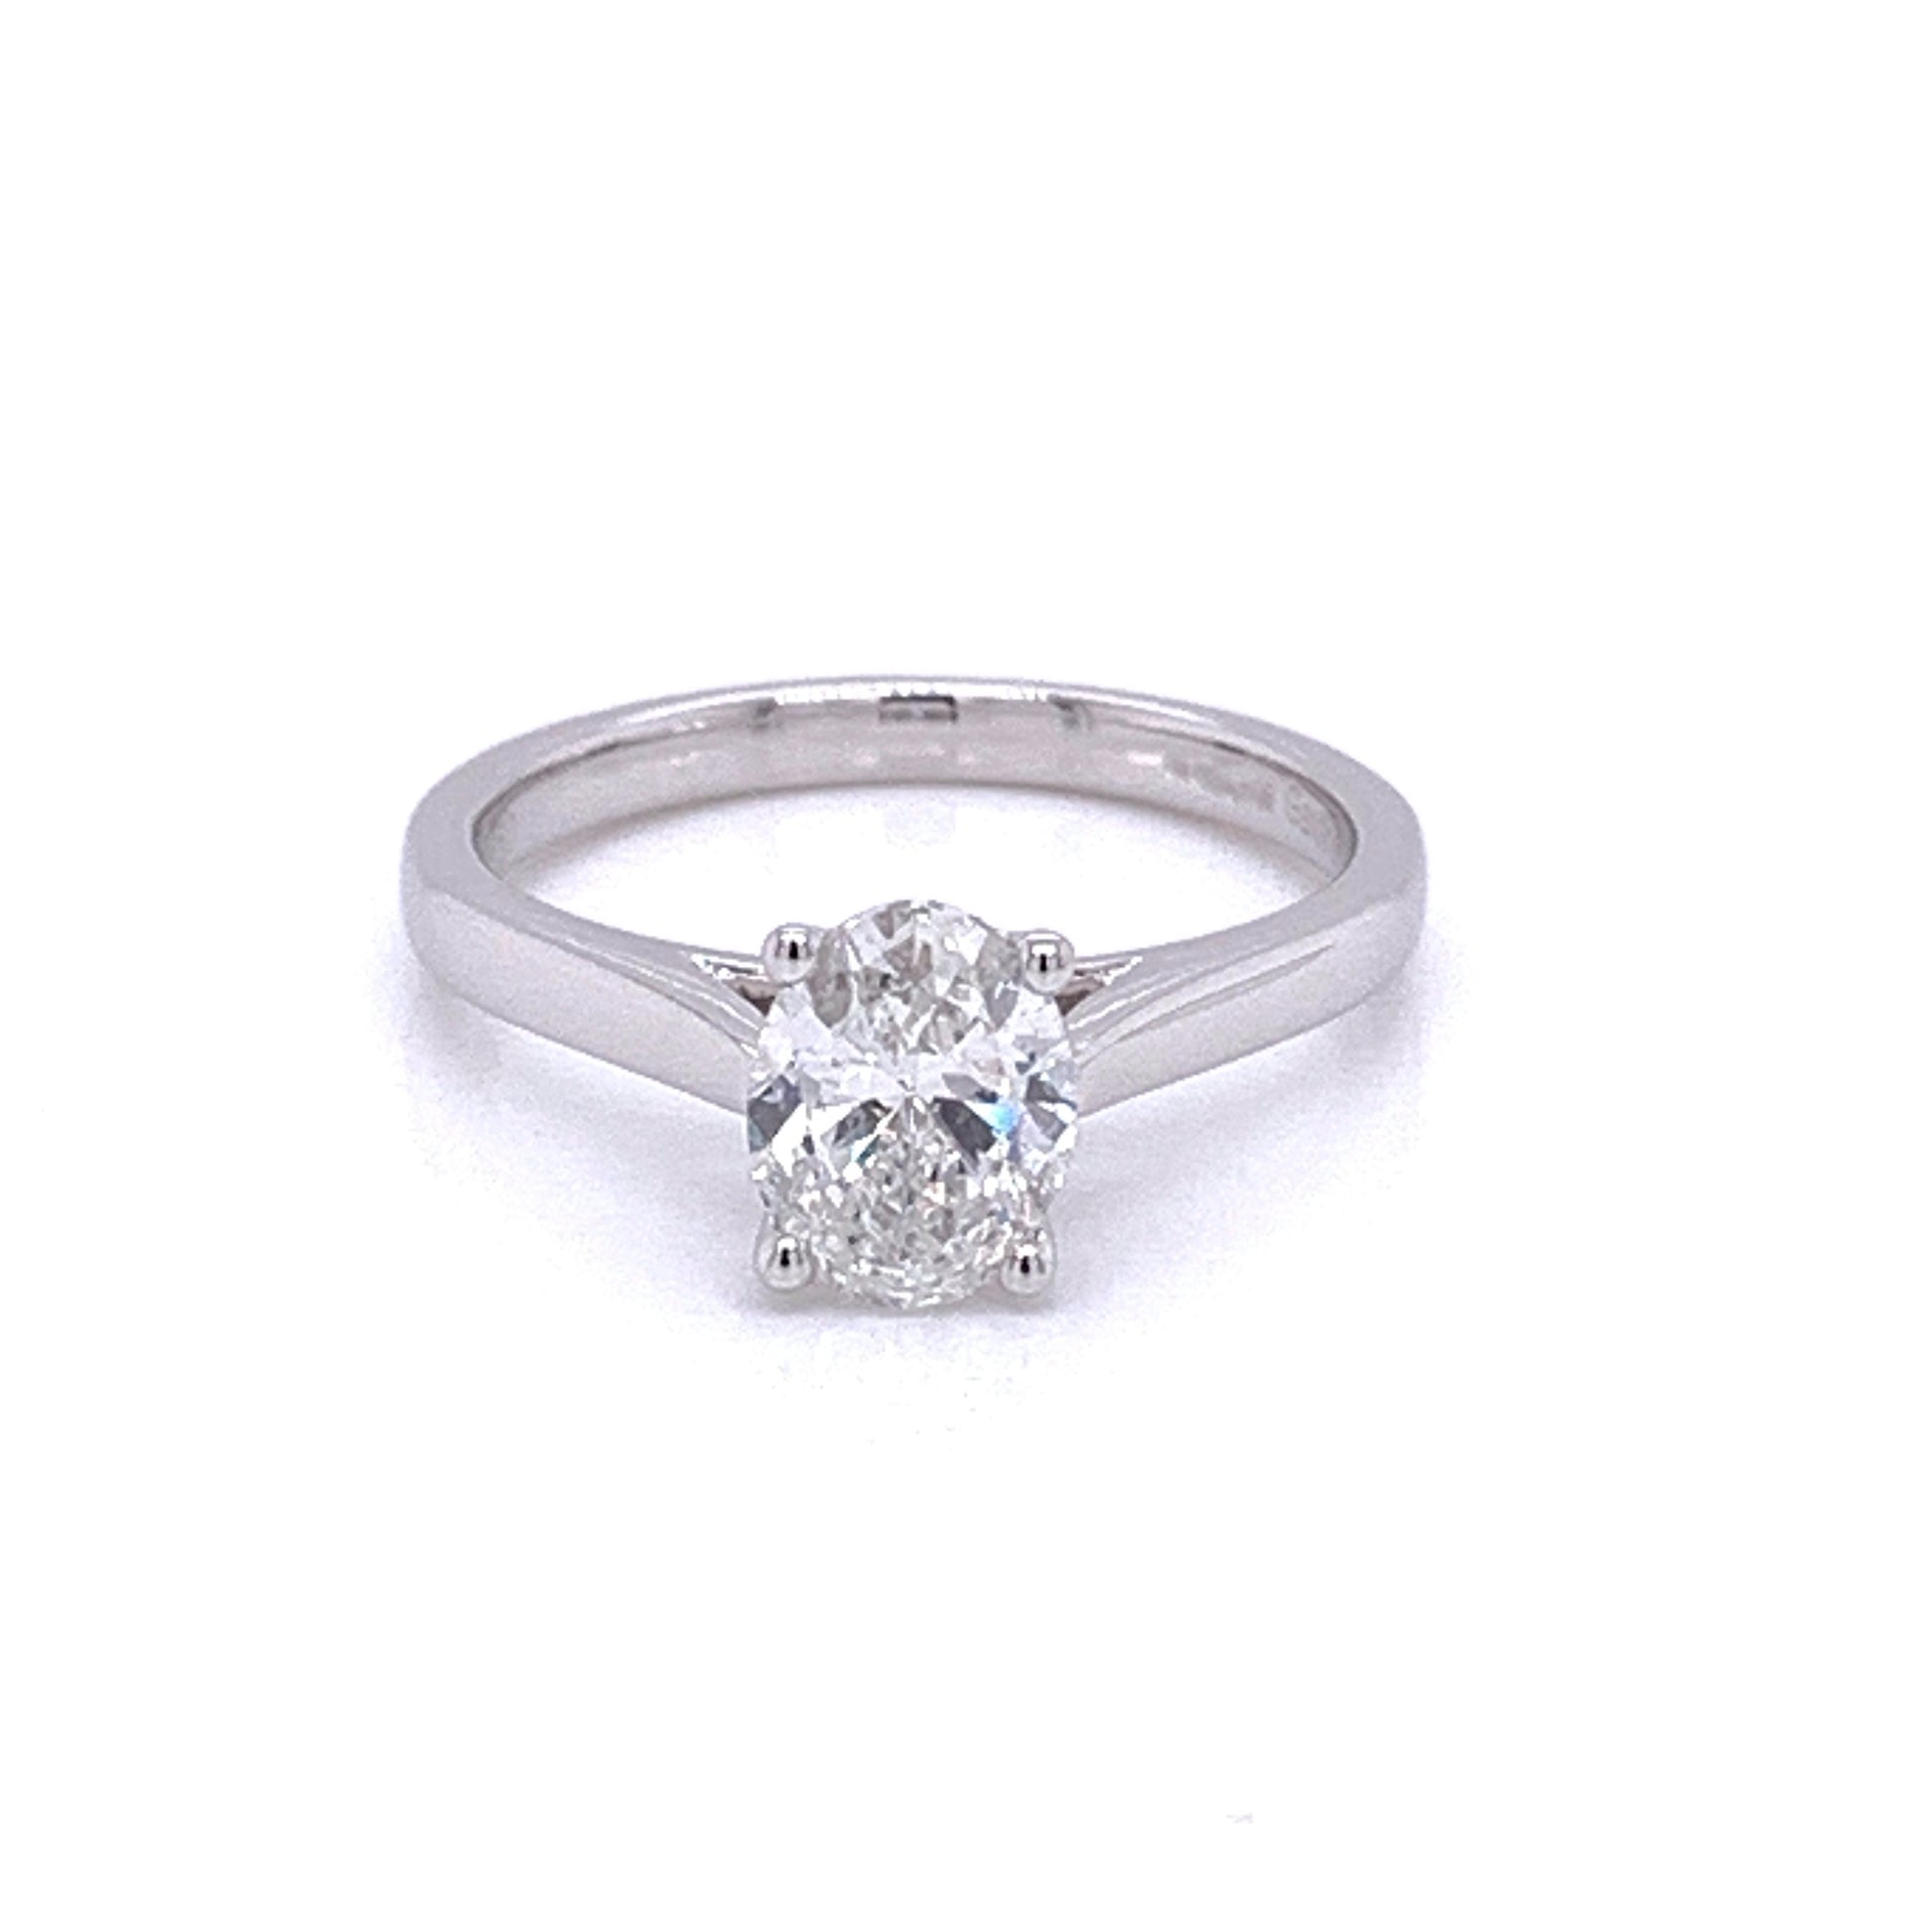 Oval Shaped Diamond Solitaire Ring - 1.00cts  Gardiner Brothers   